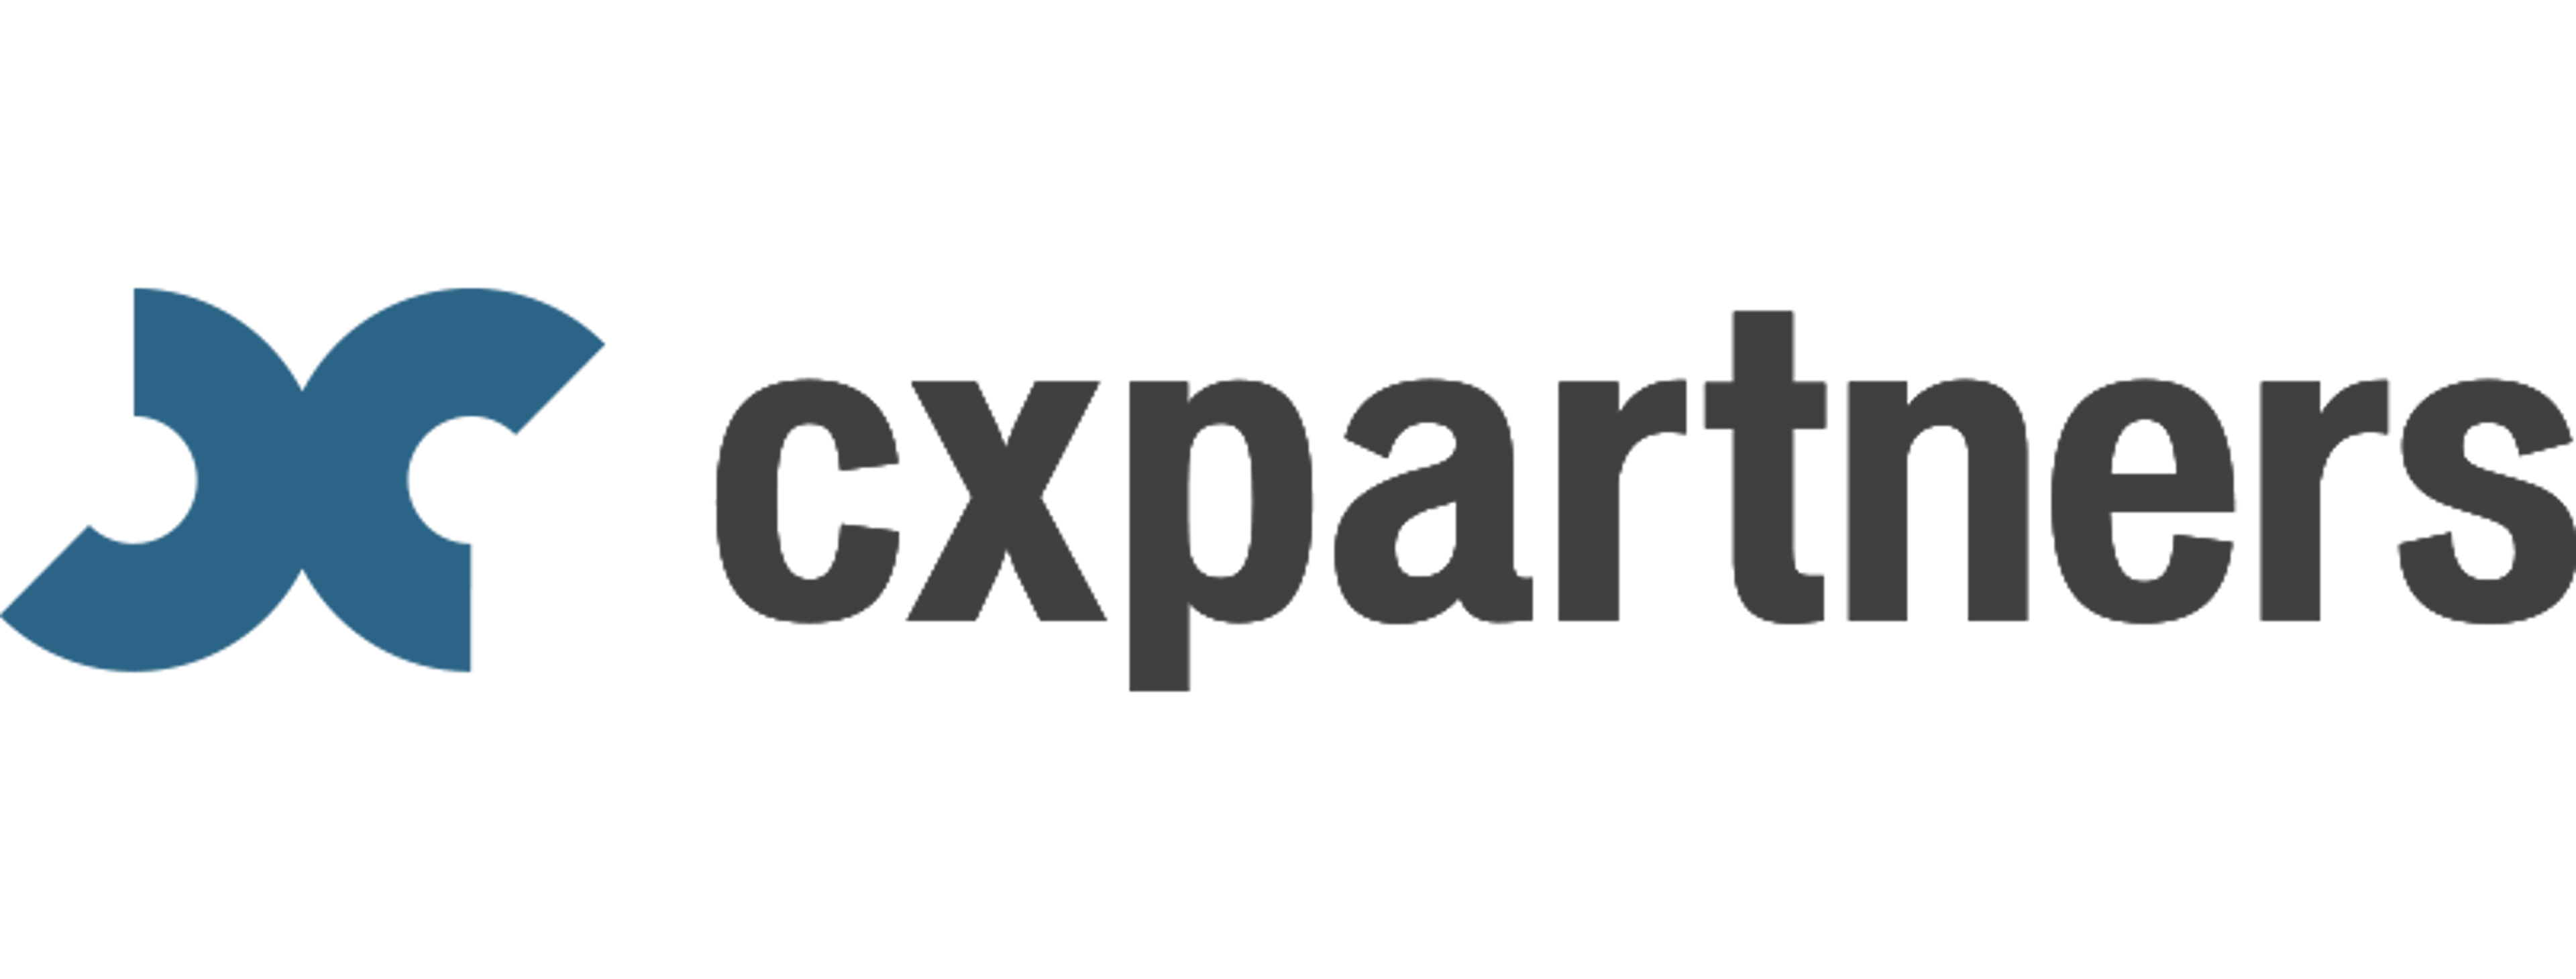 The logo for cxpartners